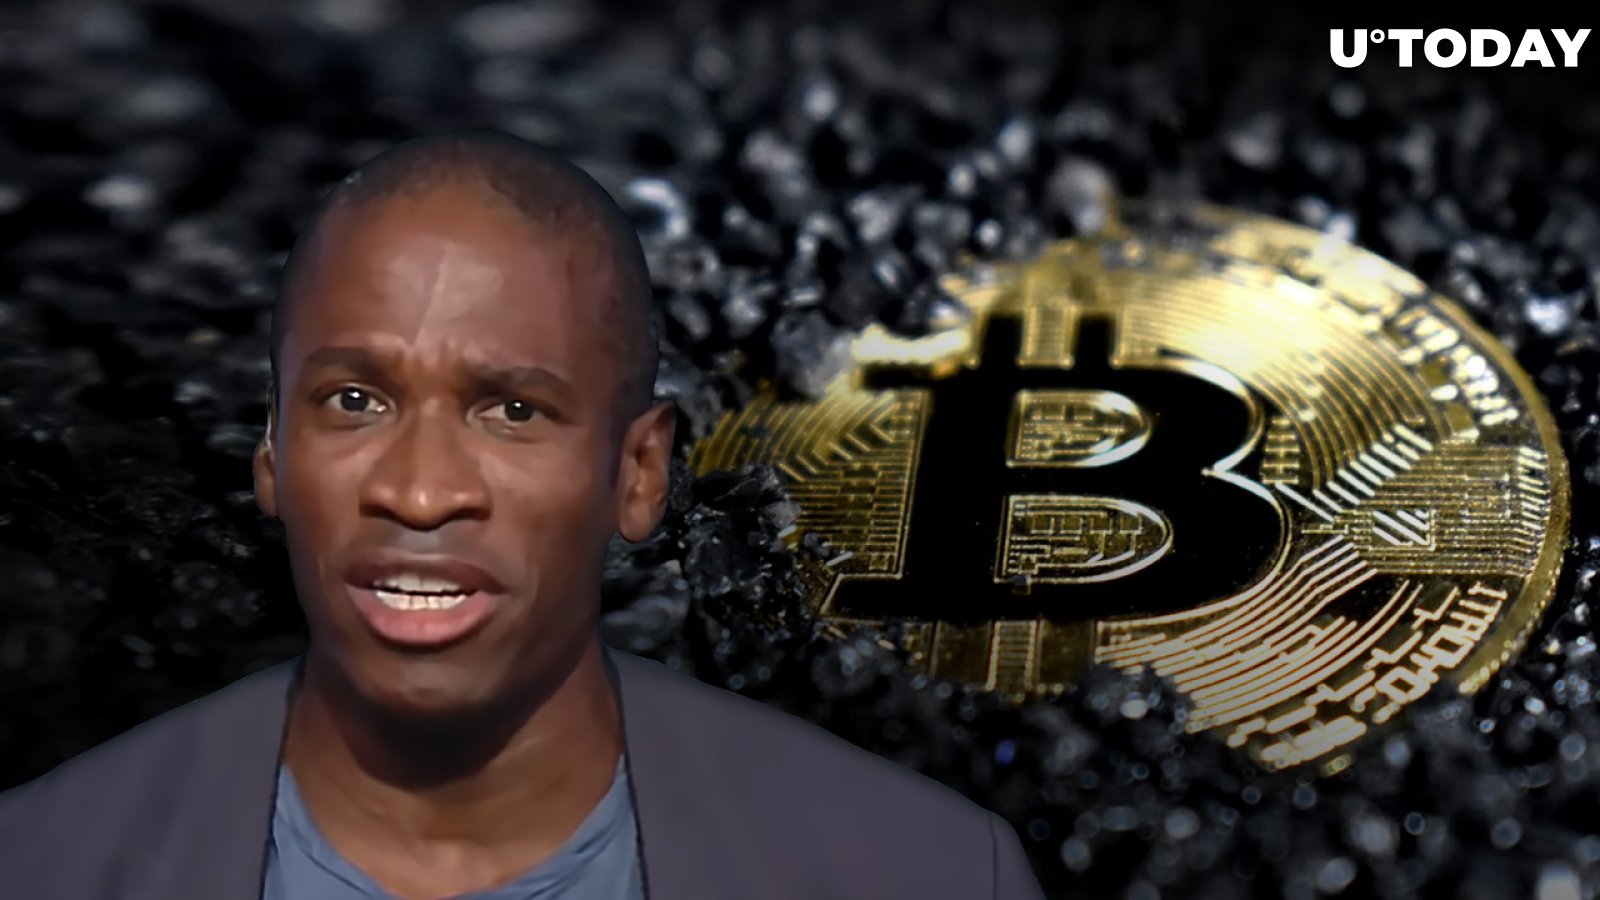 Bitcoin Has Already Bottomed Out, But Don't Expect Quick Recovery, Says Arthur Hayes